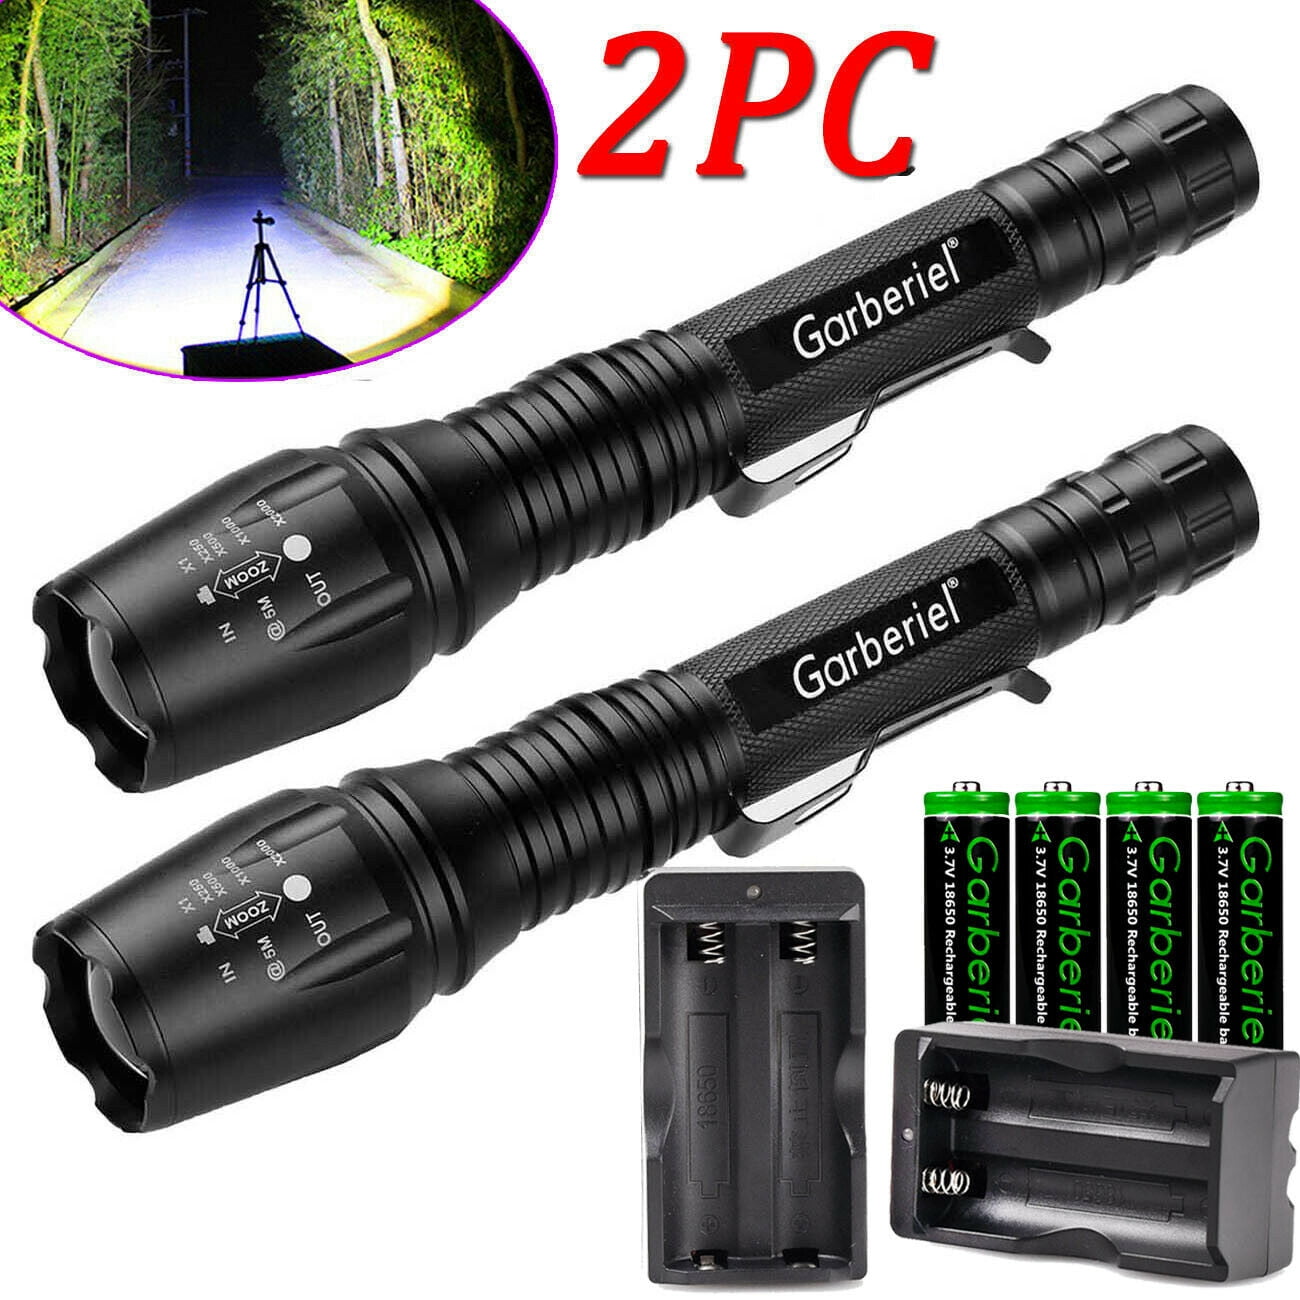 990000Lumens Tactical Zoomable L2 LED Powerful Flashlight 18650 Torch Light Lamp 